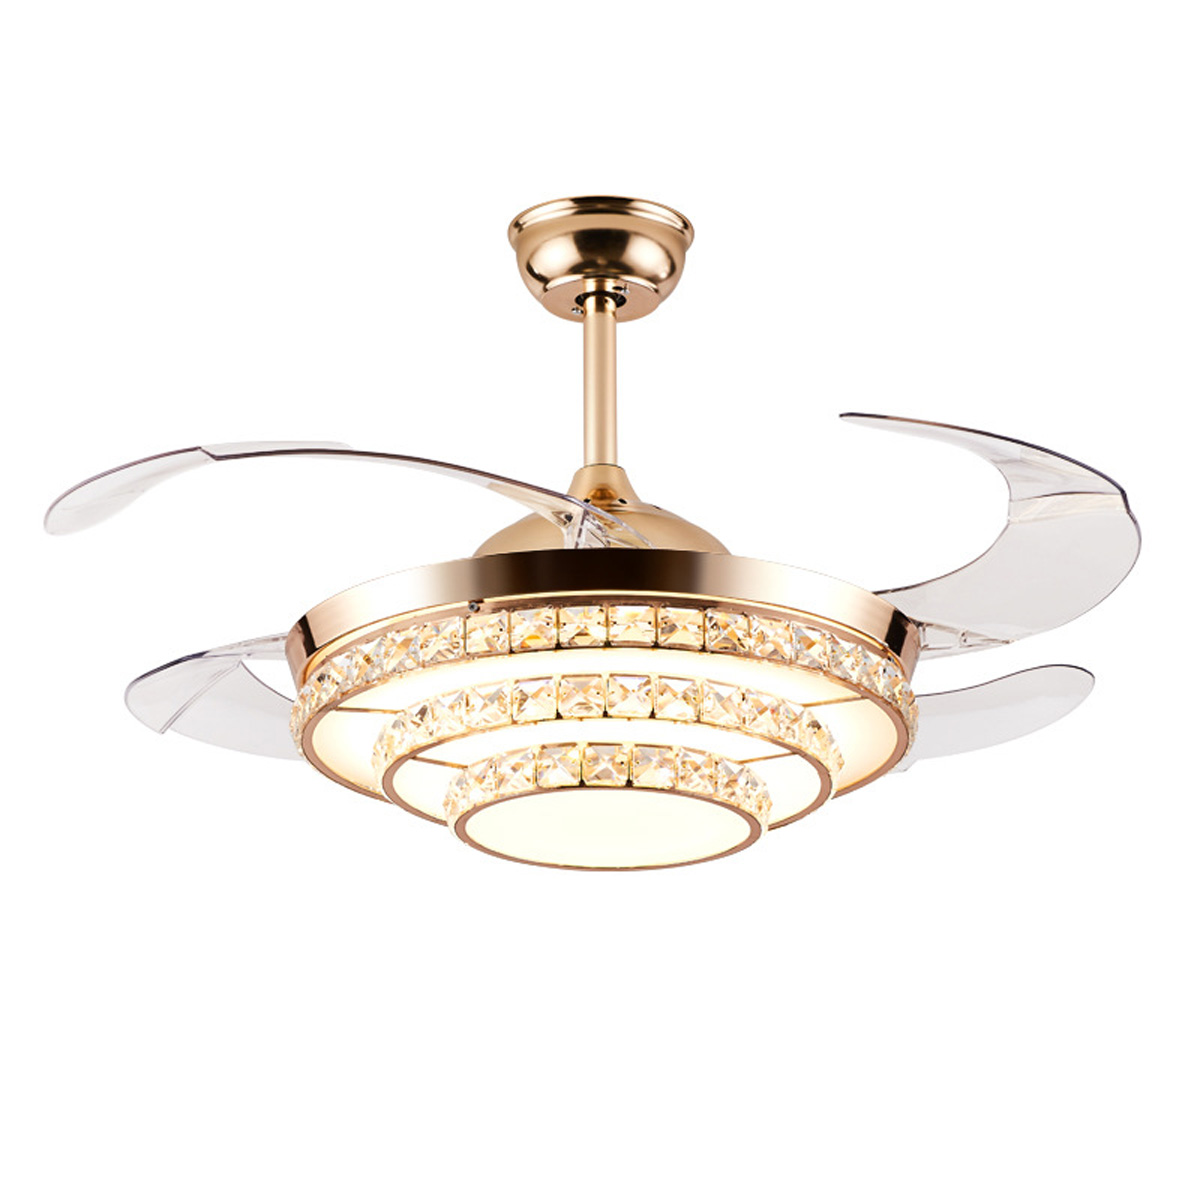 Find 220V 65W 42 Retractable Ceiling Fan Light LED Chandelier 3Speed Remote Control for Sale on Gipsybee.com with cryptocurrencies